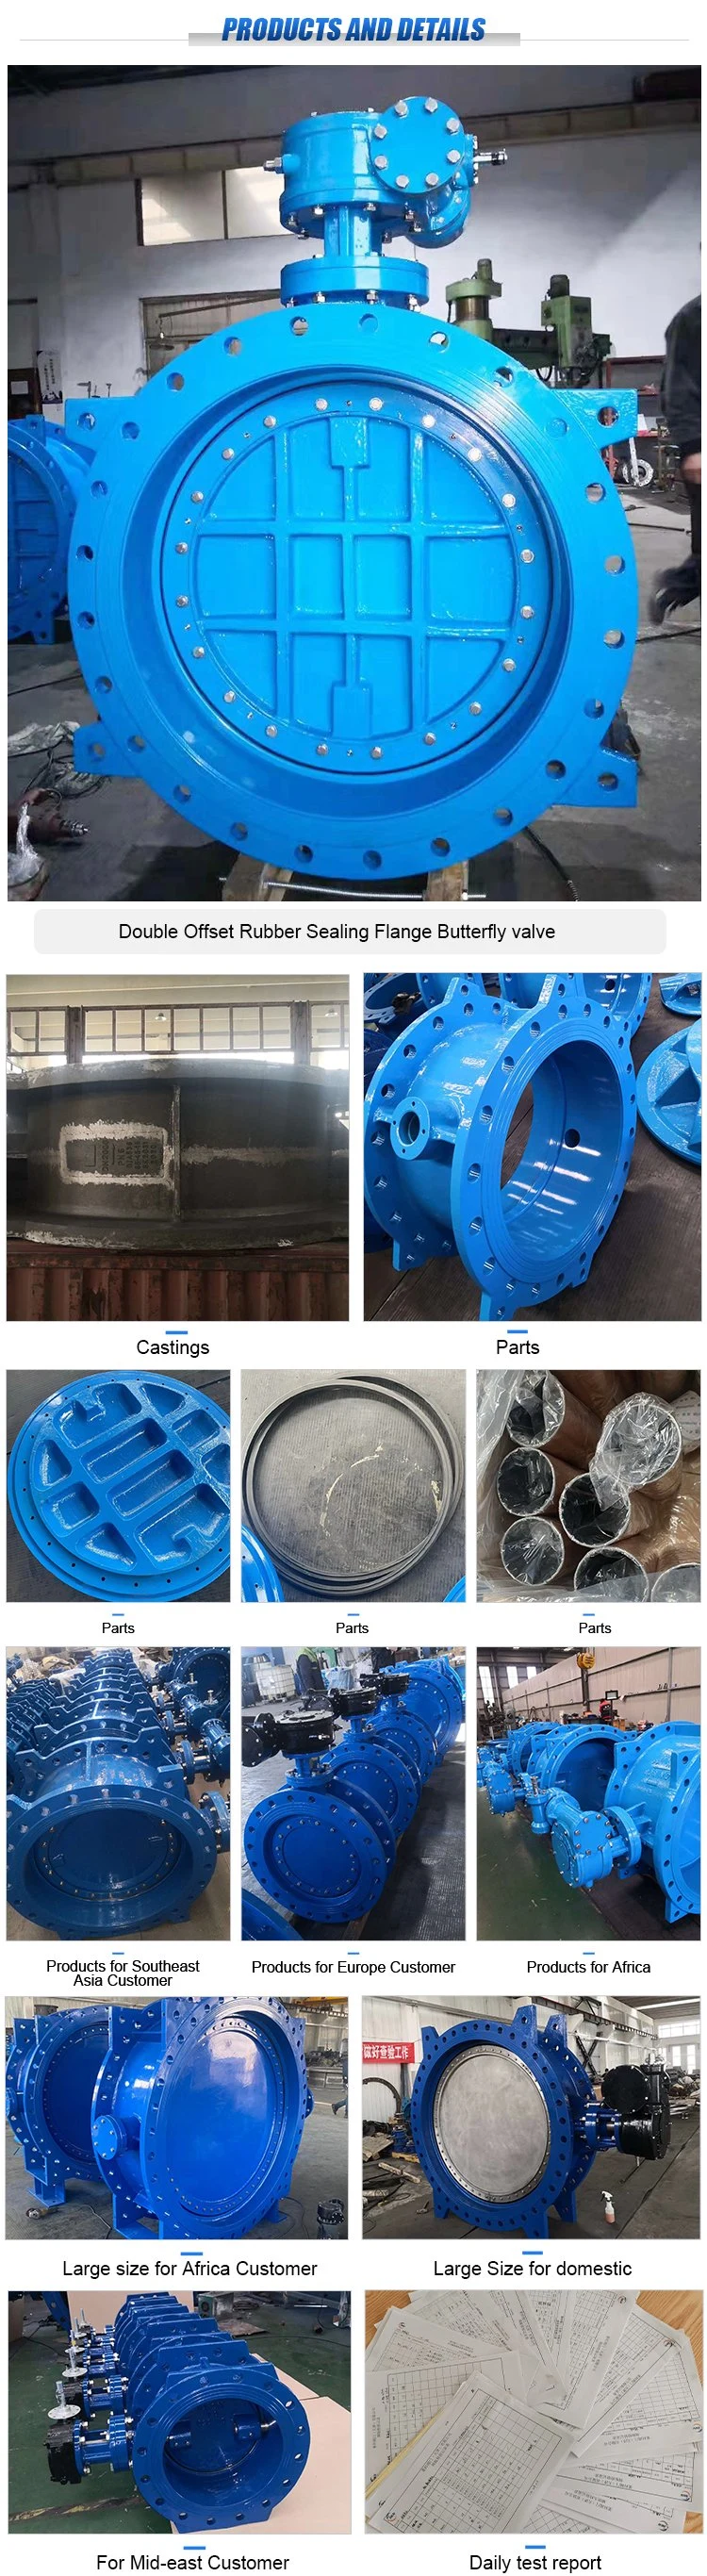 Flange End Connection Cast Iron Triple Offset Butterfly Valve Pn16 Gear Operated